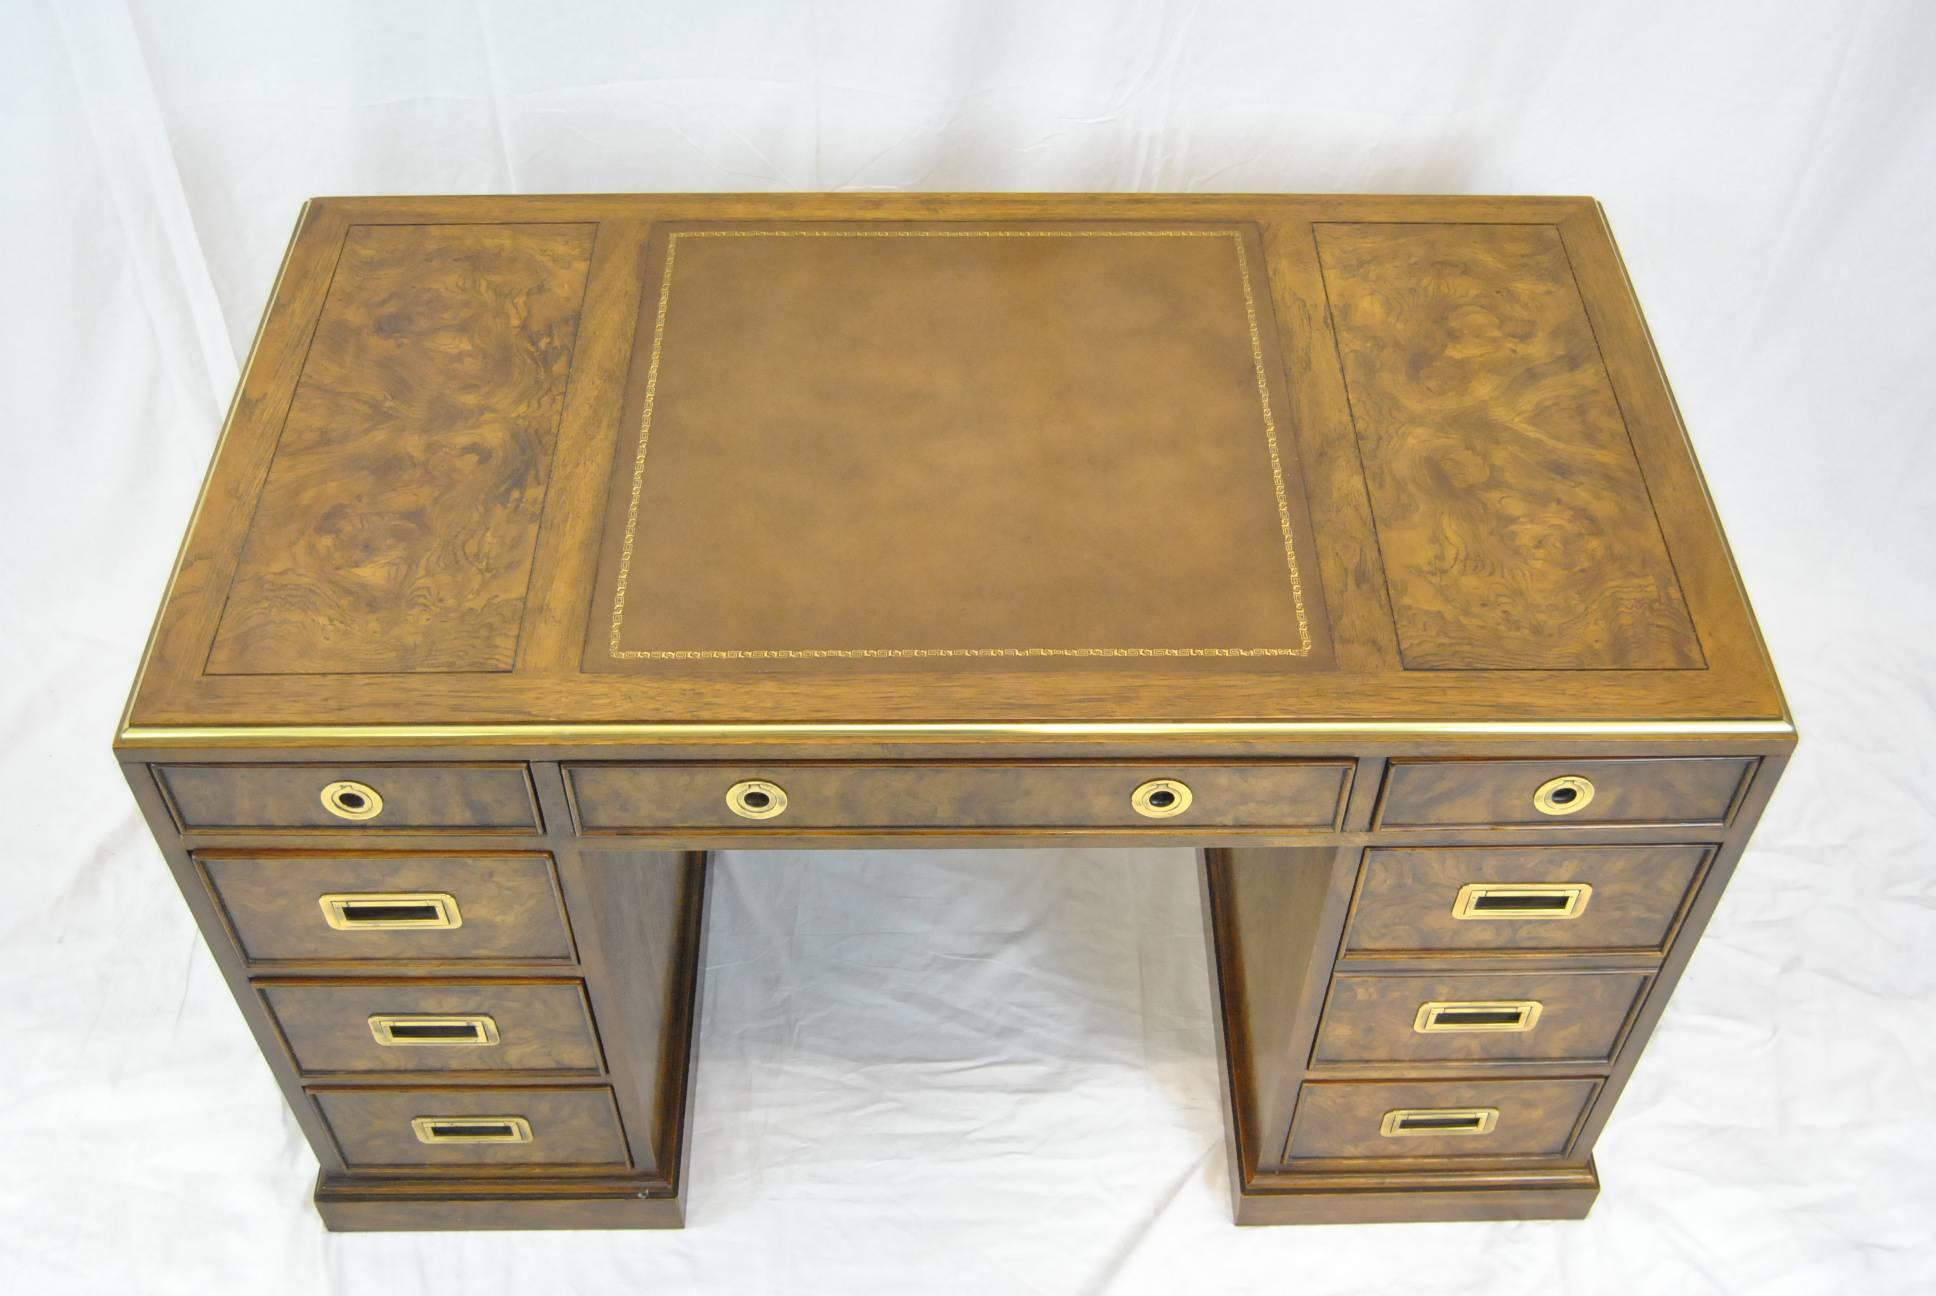 A Classic Campaign style desk by Drexel. The desk is done in burled wood with a leather insert on top and brass trim at top edge. There are three shallow drawers along the top. Along the left side there are three drawers and along the right side